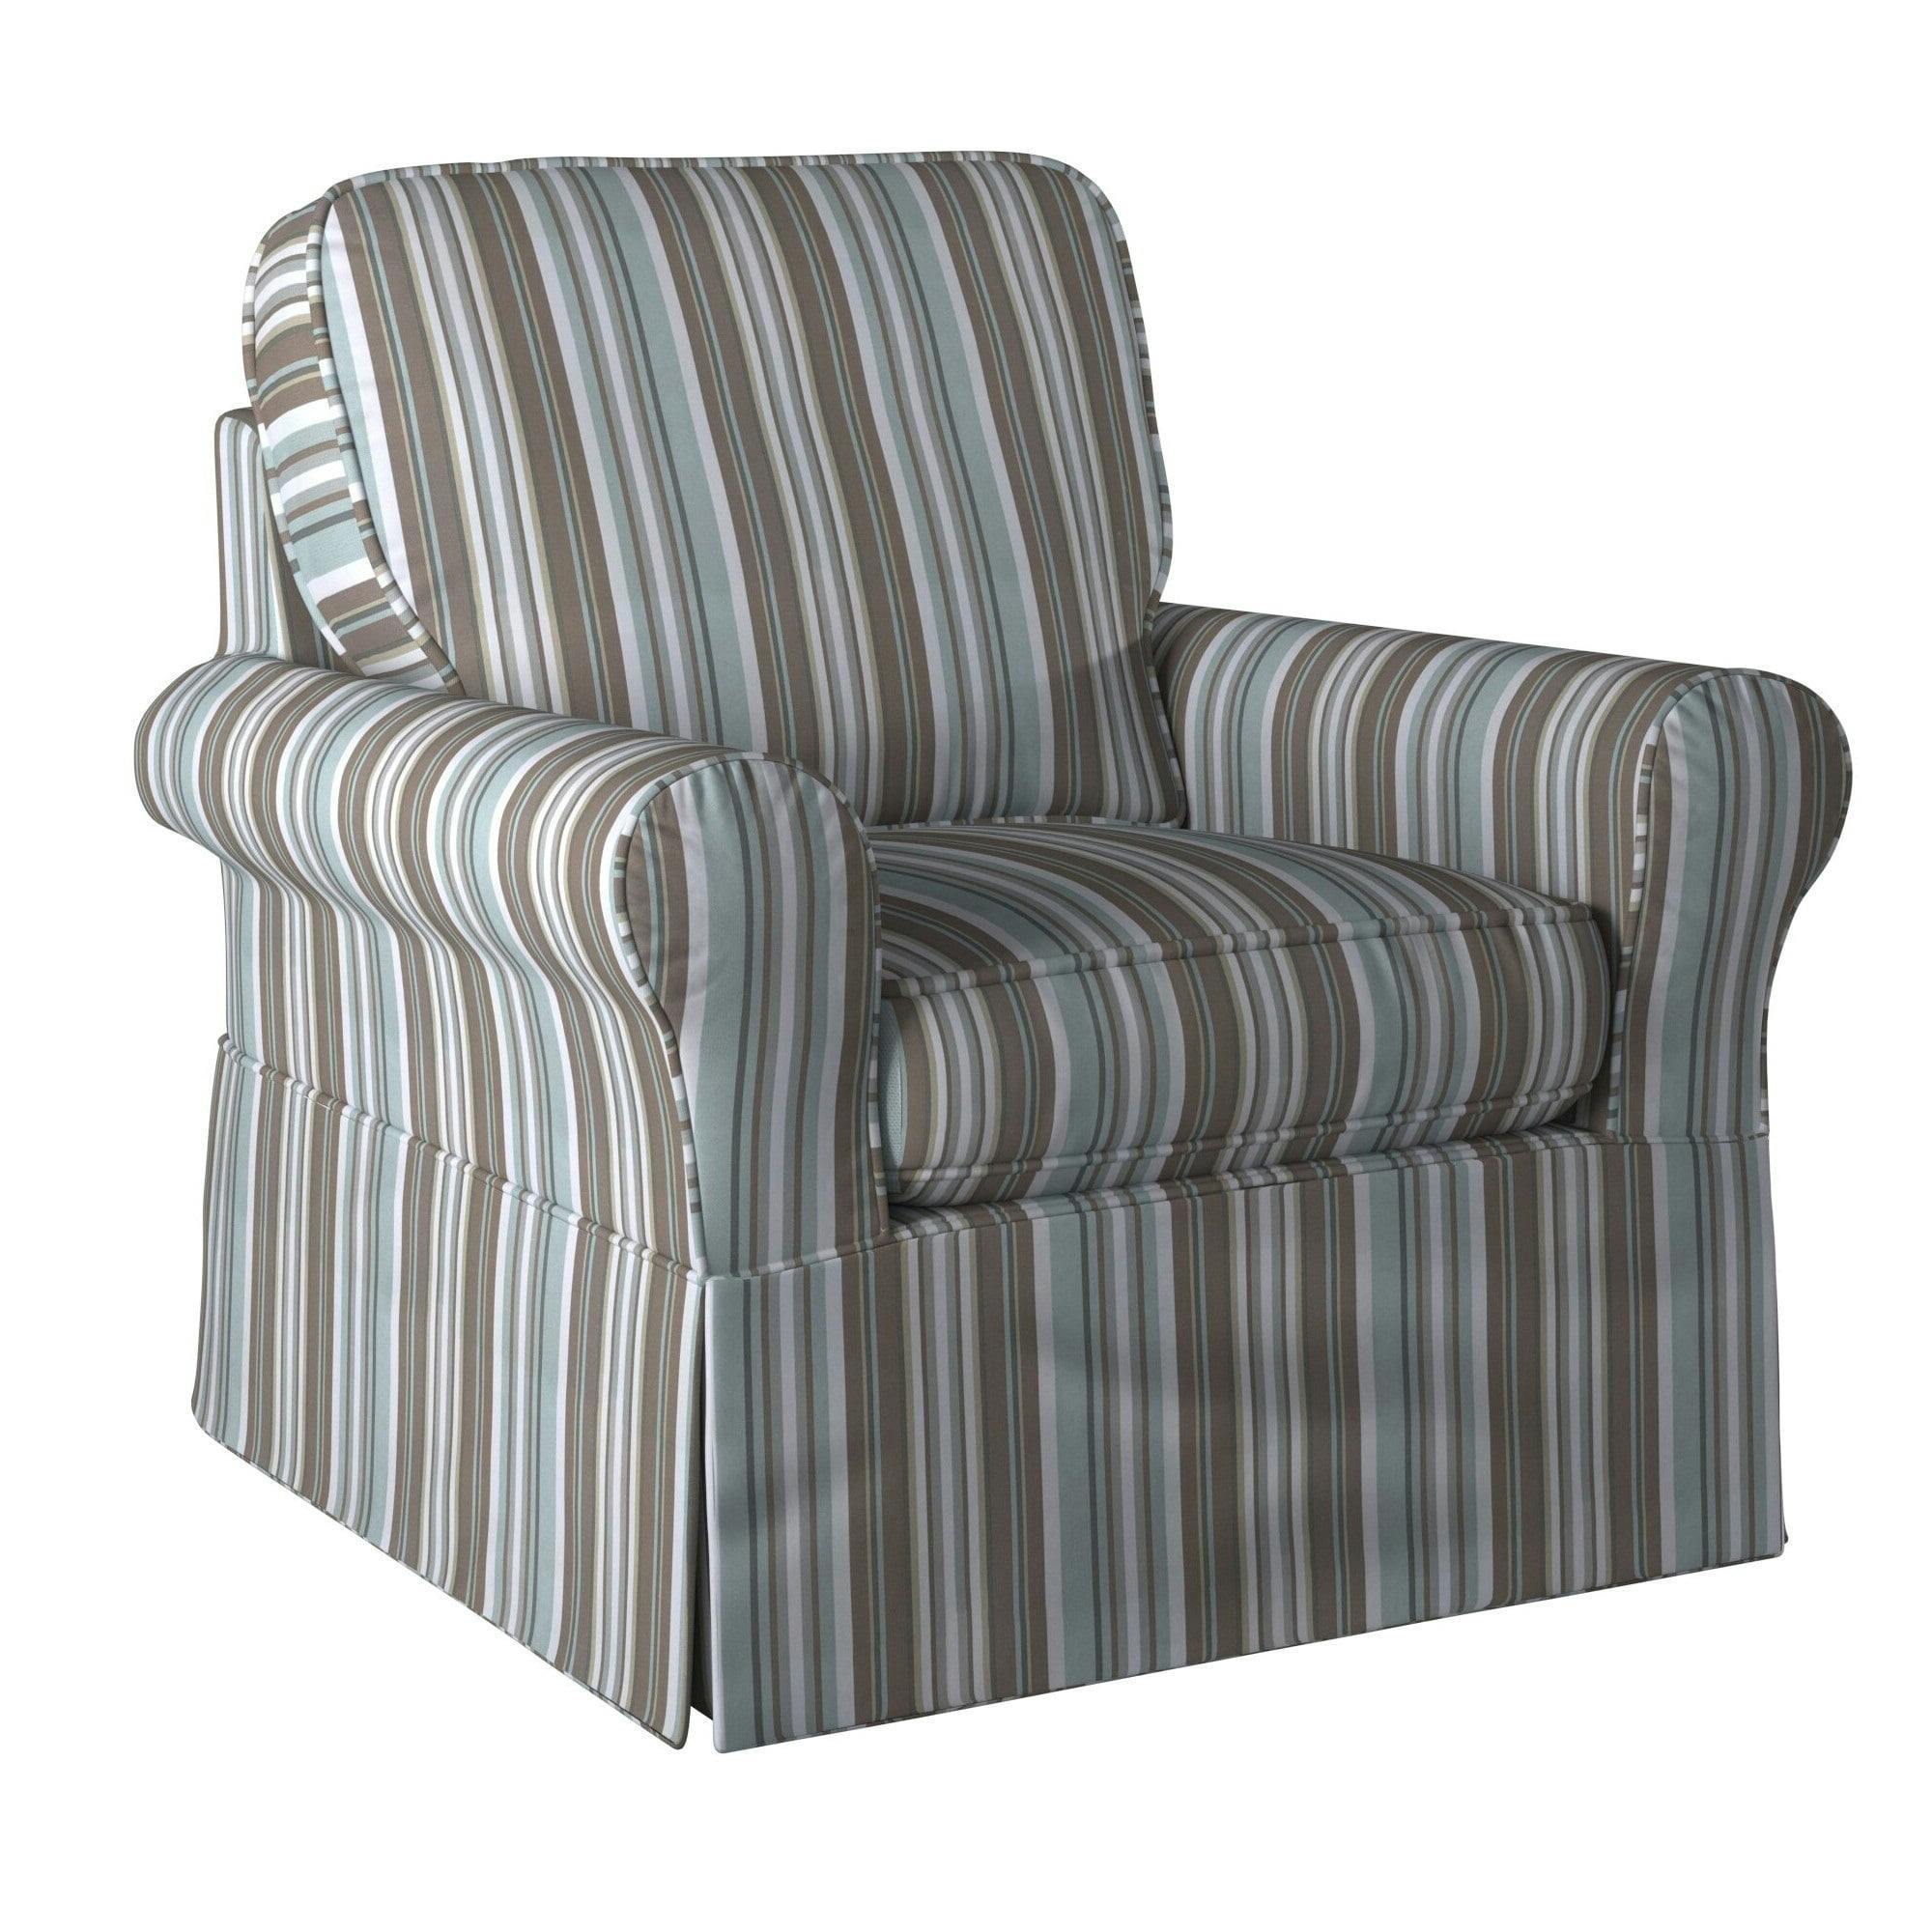 Coastal Blue Striped Slipcover for Traditional Rocker Chair